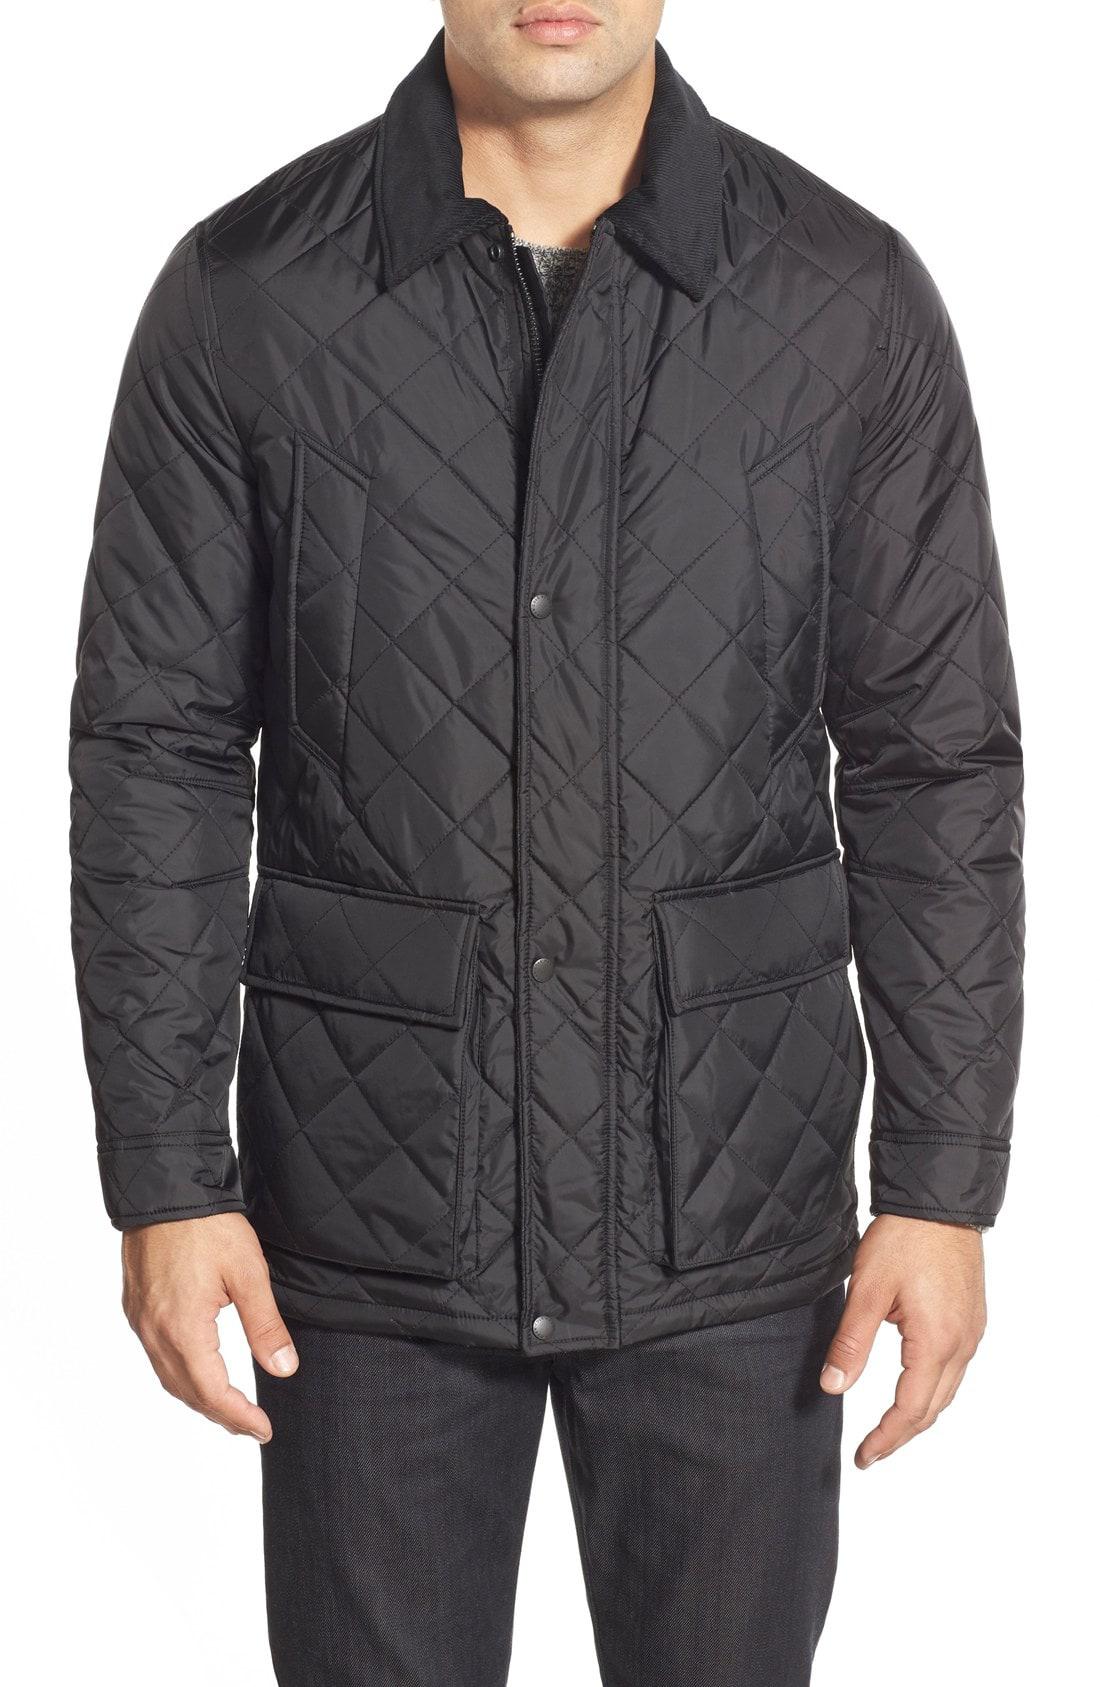 Lyst - Cole Haan Quilted Jacket in Black for Men